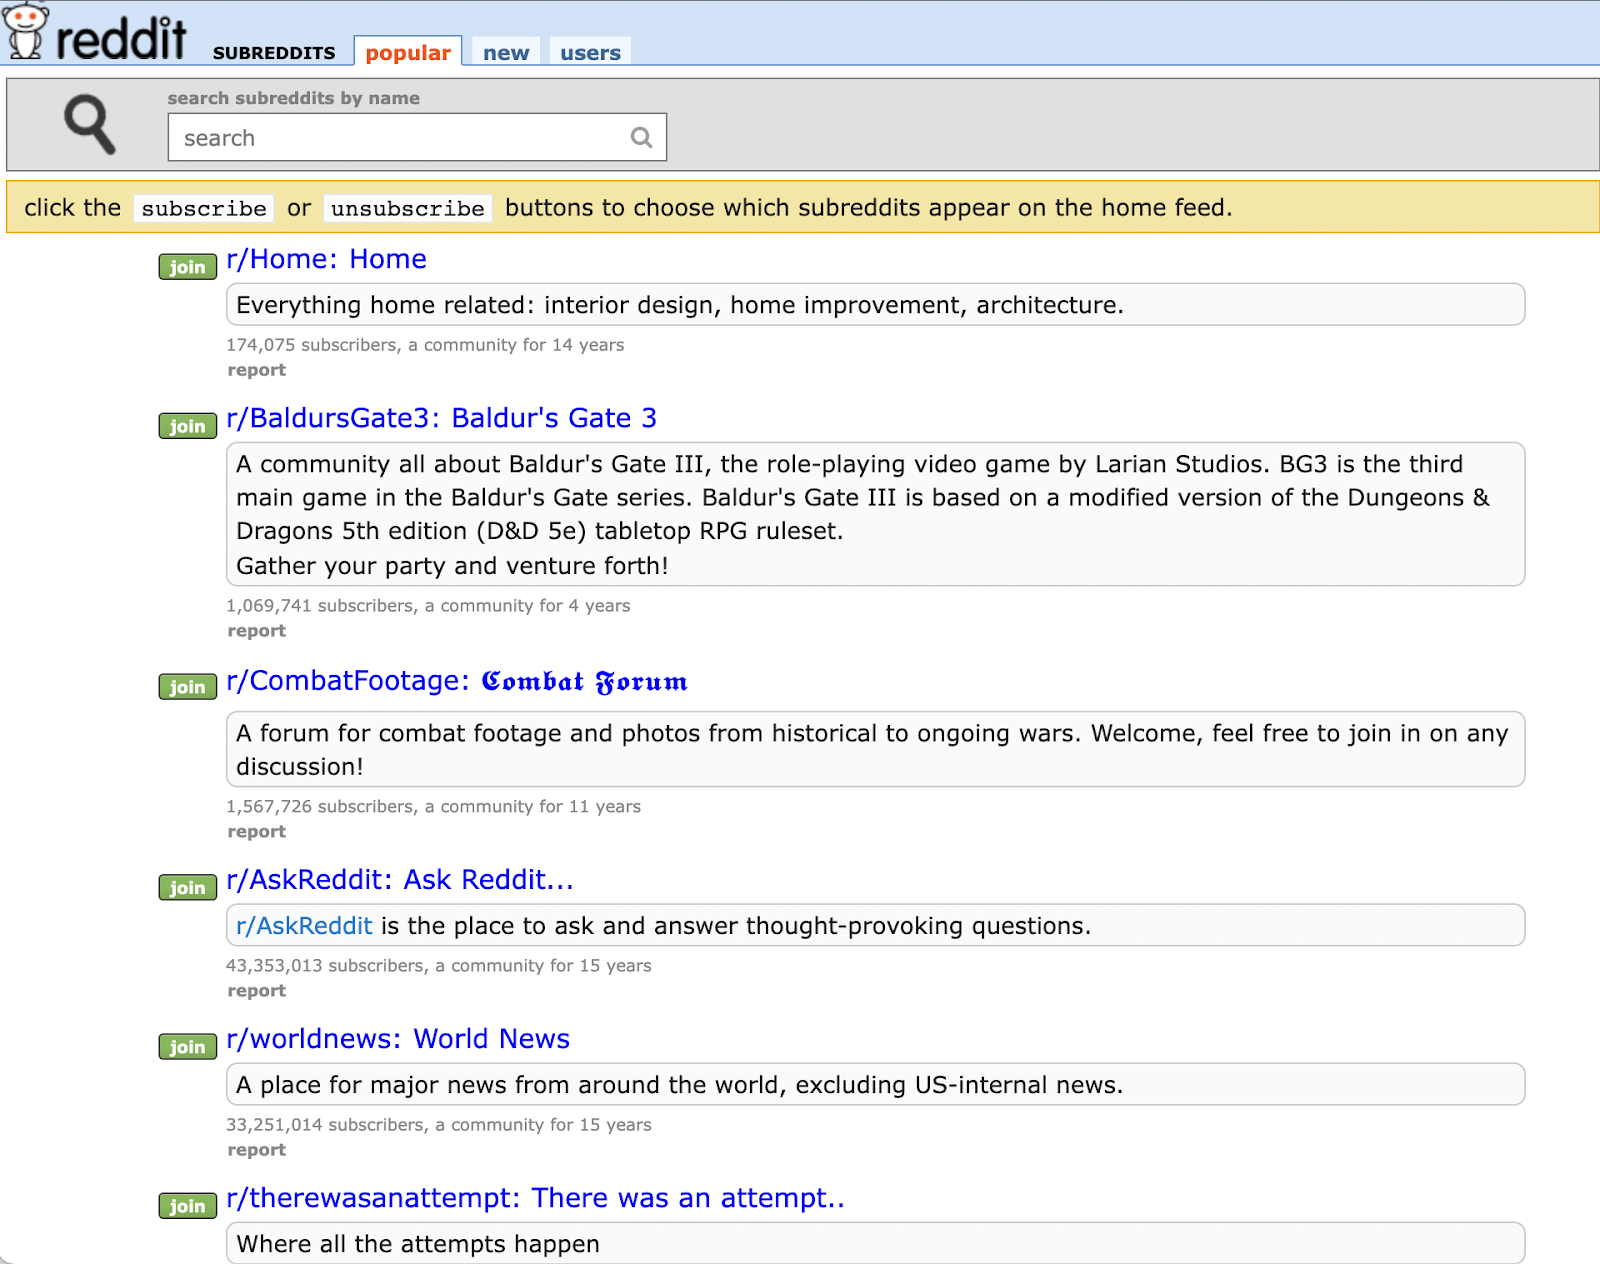 How to reach shoppers on #Reddit: insights, best practices, and resources., Reddit for Business posted on the topic